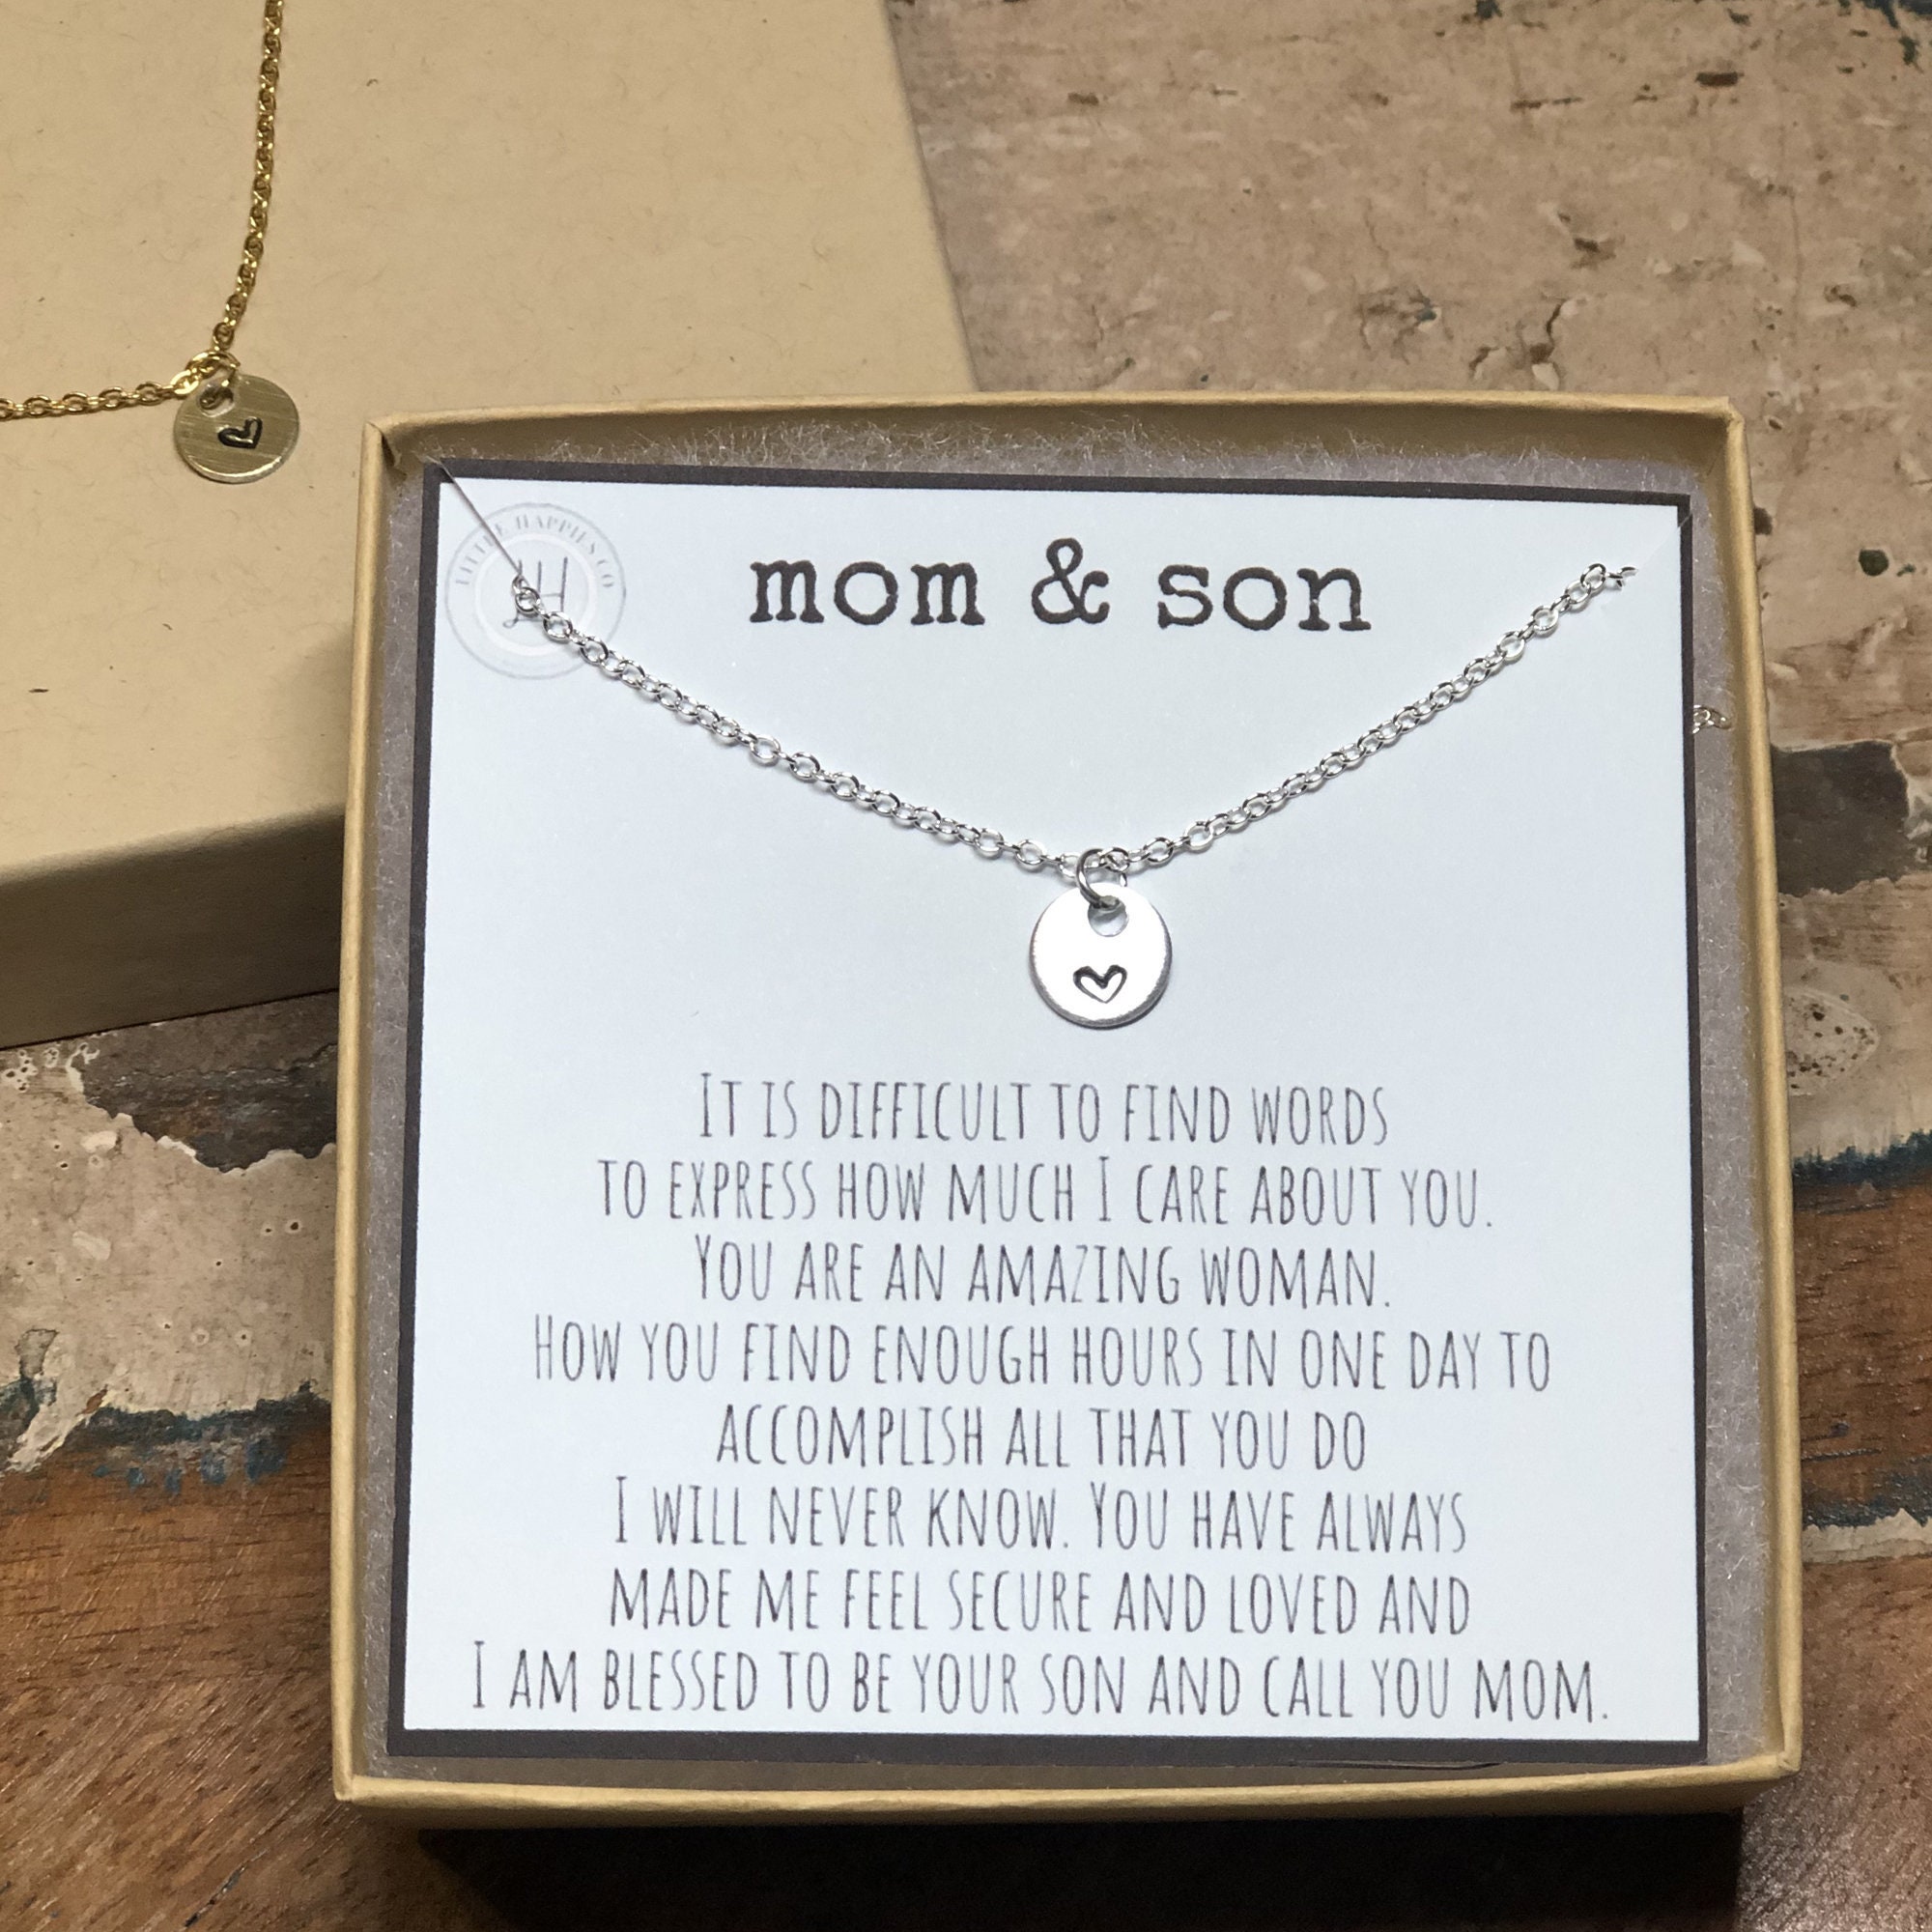 Buy Mother and Son Necklace, Mother's Day Gift for Mom from Son, Mom Birthday Gift from Son, Mom Necklace, Mother's Day Gift Online | {Made with Luv